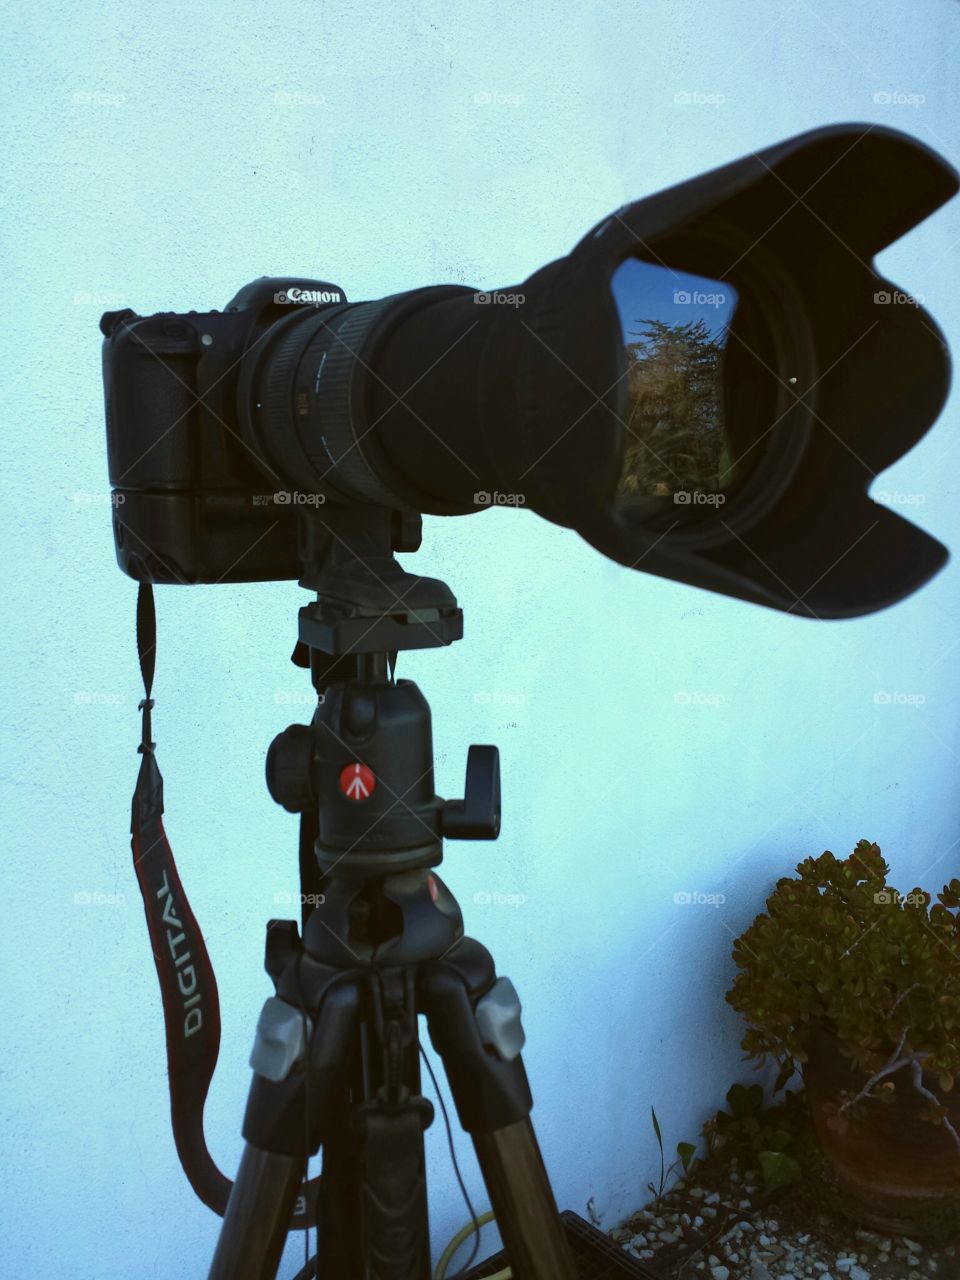 Canon with a telephoto lens on a Manfrotto tripod